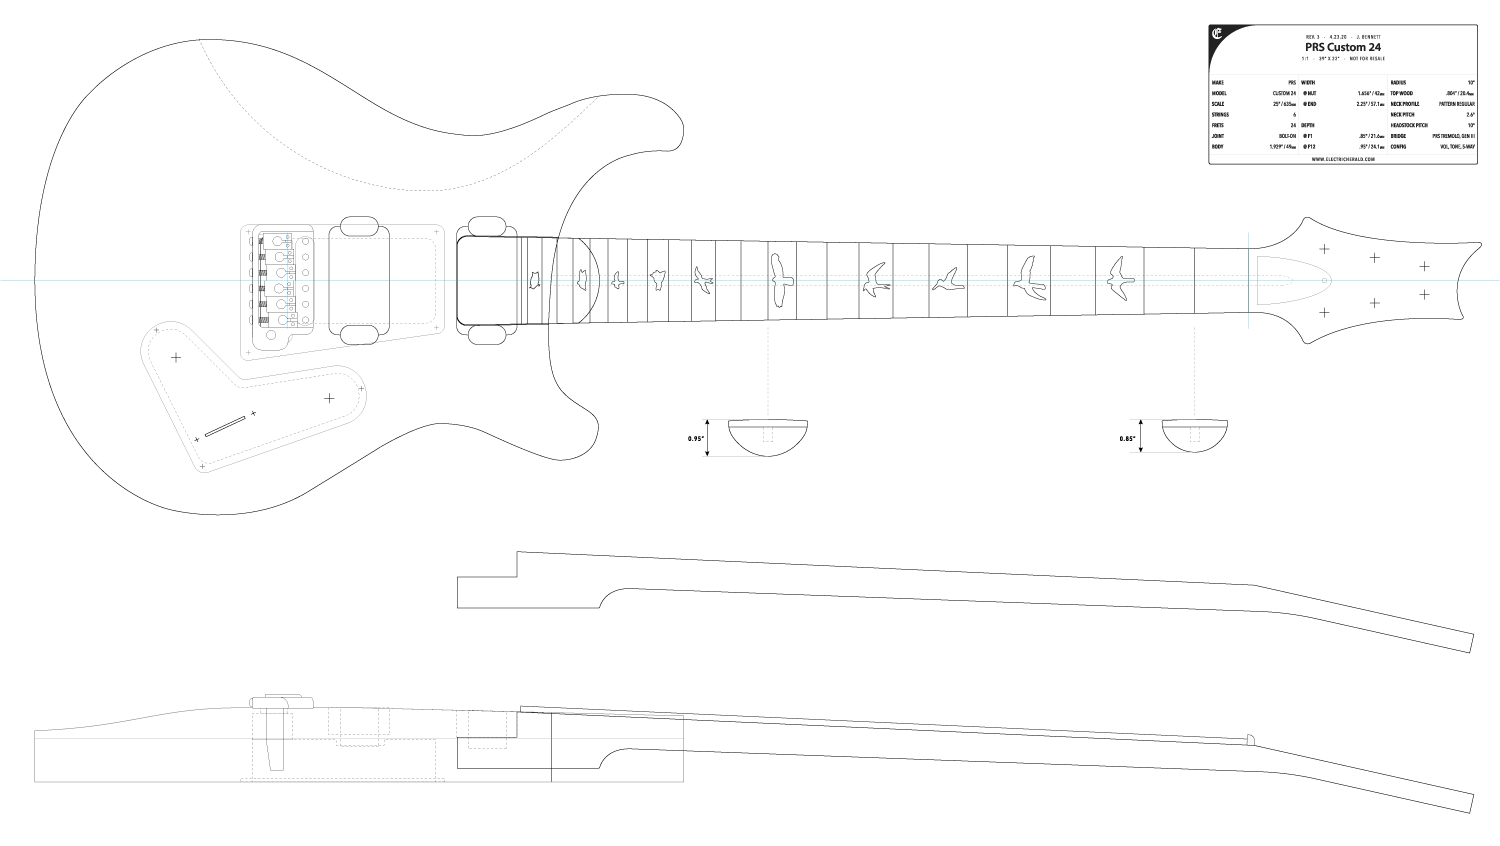 Electric Guitar Layout Template PRS24